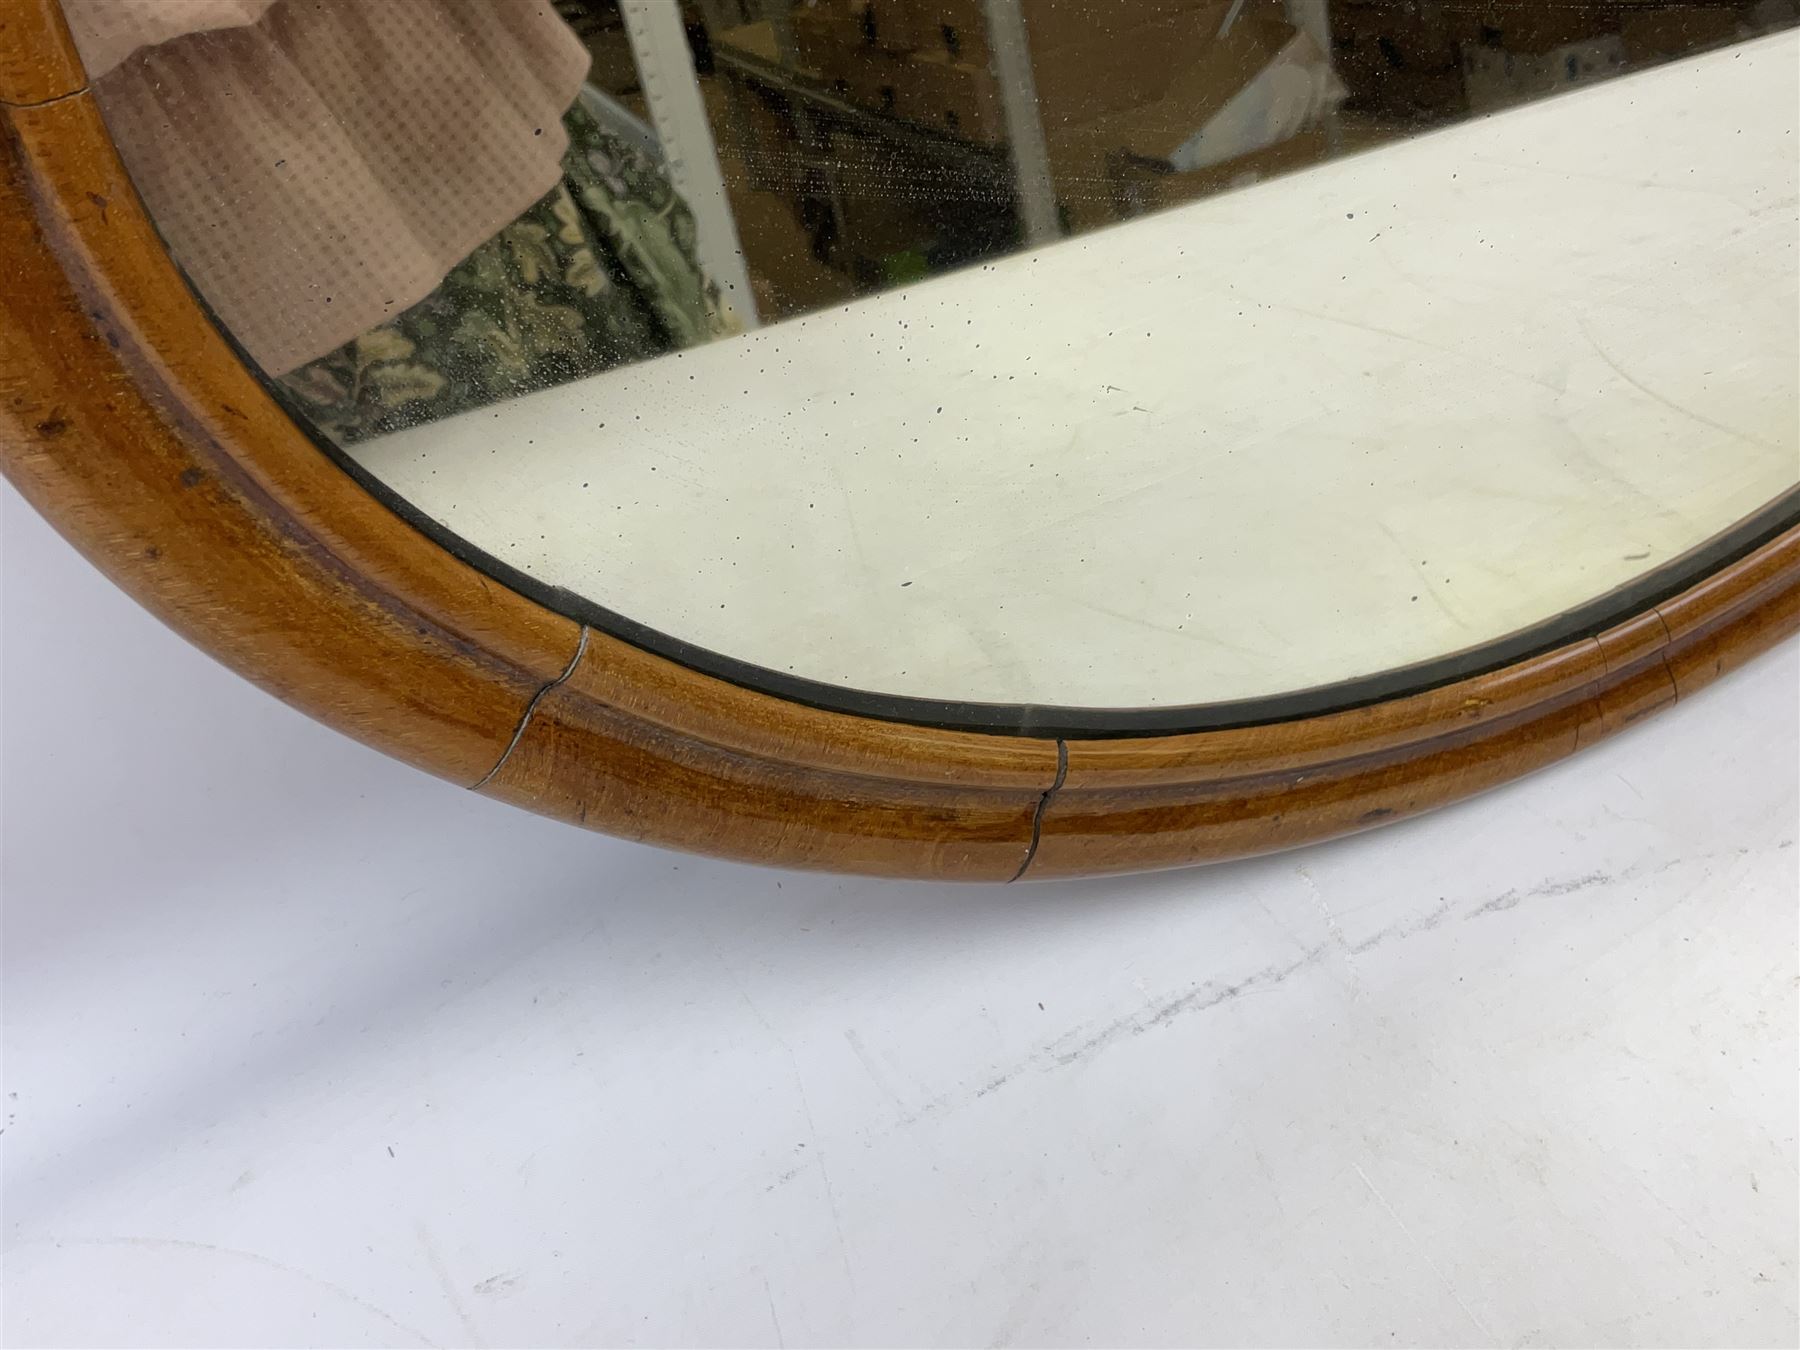 Dressing table mirror for restoration - Image 3 of 8